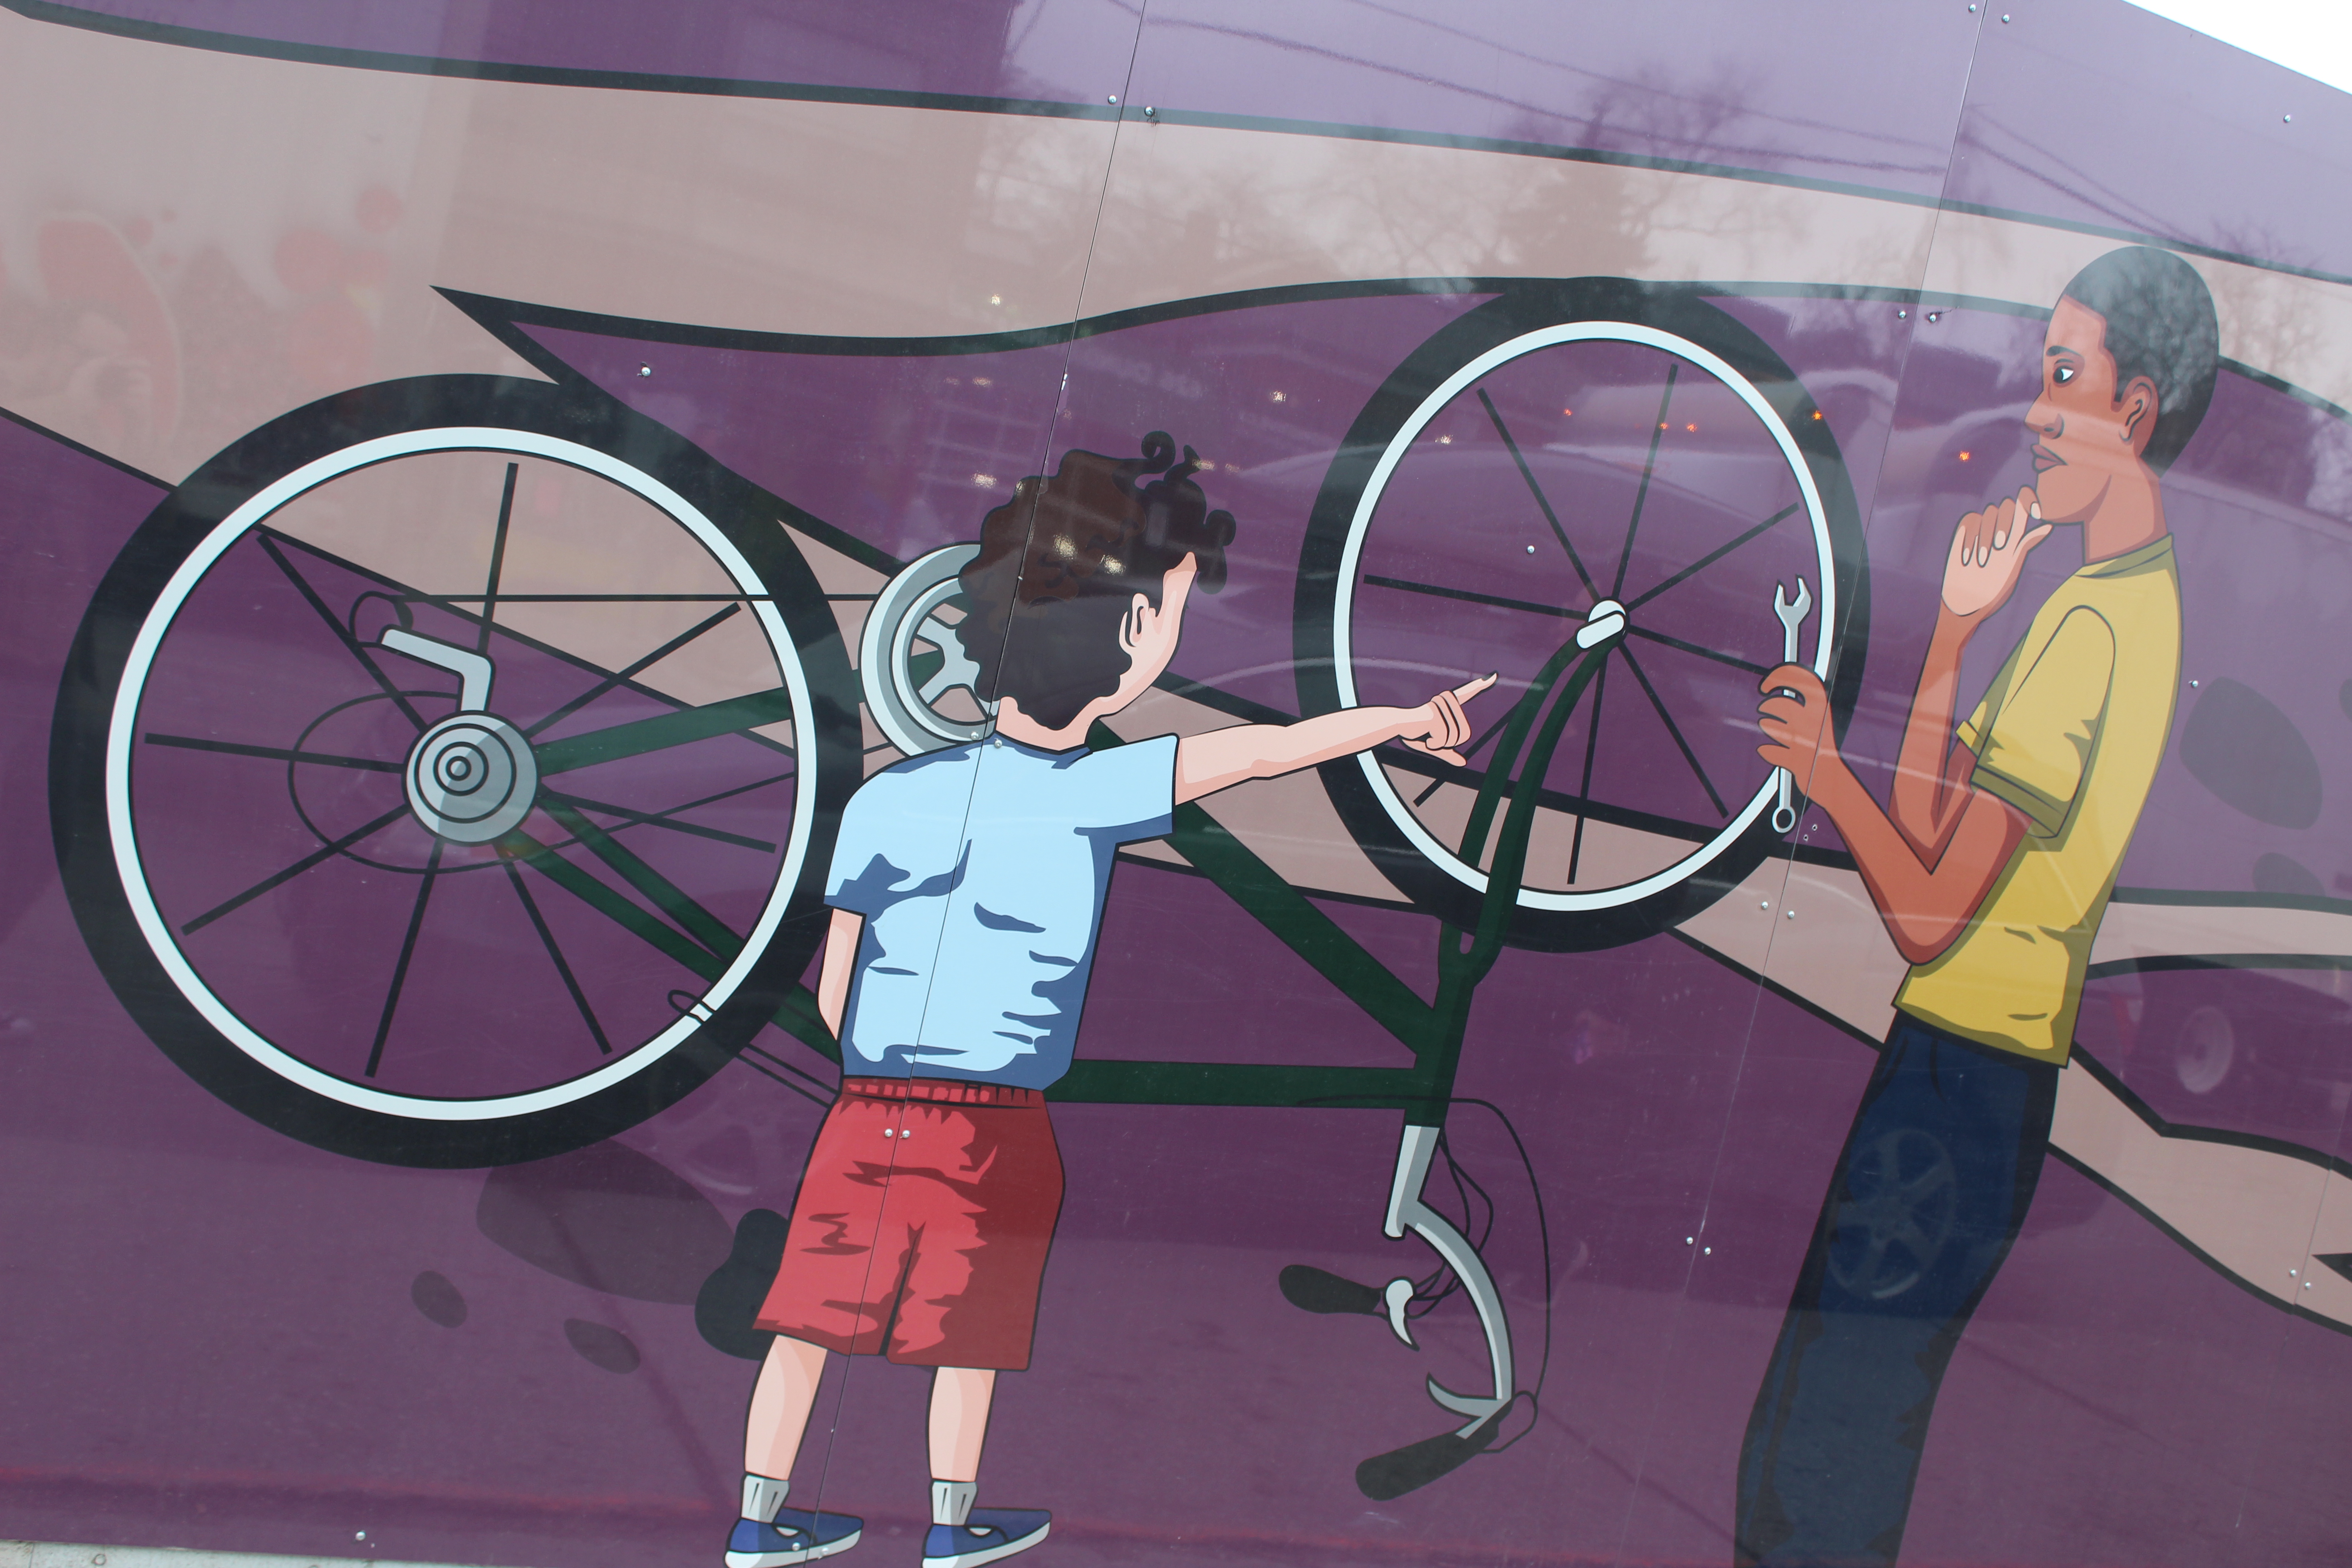 mural illustration of a youth fixing a bicycle